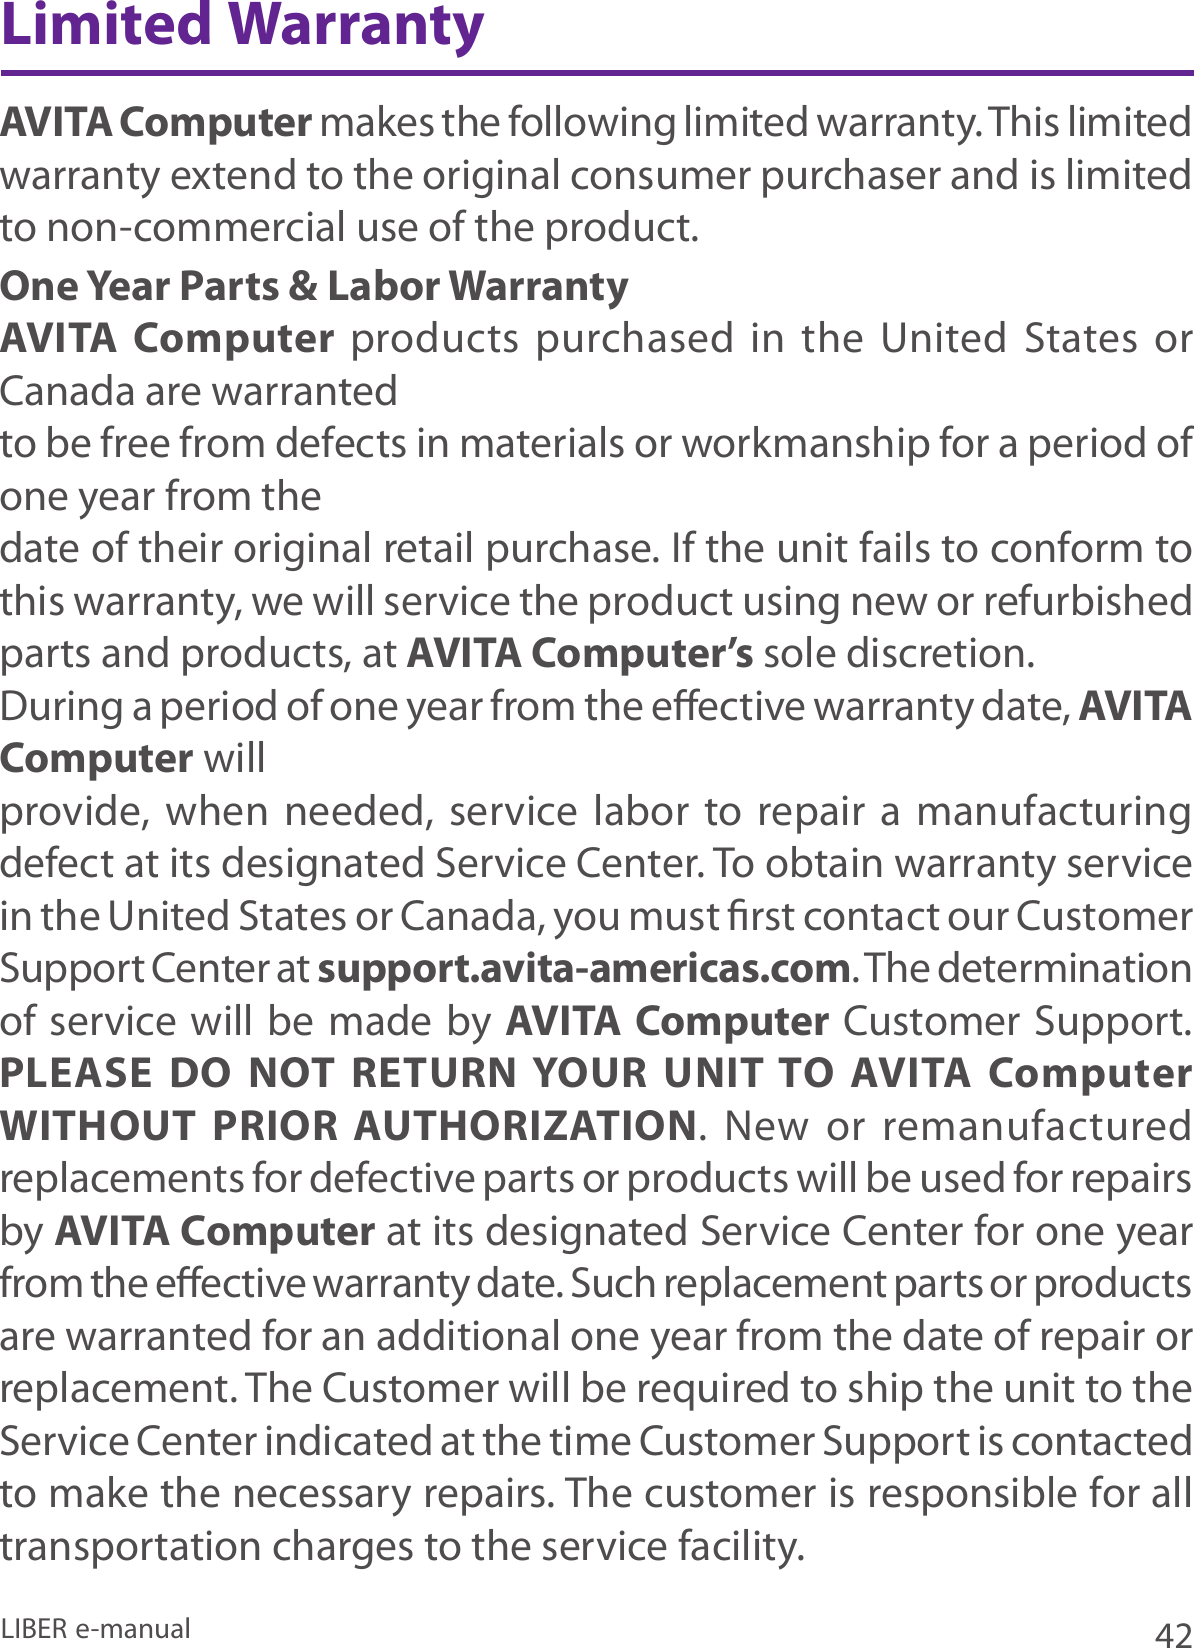 42LIBER e-manualAVITA Computer makes the following limited warranty. This limited warranty extend to the original consumer purchaser and is limited to non-commercial use of the product.One Year Parts &amp; Labor WarrantyAVITA Computer products  purchased  in  the  United  States or Canada are warrantedto be free from defects in materials or workmanship for a period of one year from thedate of their original retail purchase. If the unit fails to conform to this warranty, we will service the product using new or refurbished parts and products, at AVITA Computer’s sole discretion.During a period of one year from the eective warranty date, AVITA Computer willprovide, when needed, service labor to repair a manufacturing defect at its designated Service Center. To obtain warranty service in the United States or Canada, you must rst contact our Customer Support Center at support.avita-americas.com. The determination of service will be made by AVITA Computer Customer Support. PLEASE DO NOT RETURN YOUR UNIT TO AVITA Computer WITHOUT PRIOR AUTHORIZATION.  New  or  remanufactured replacements for defective parts or products will be used for repairs by AVITA Computer at its designated Service Center for one year from the eective warranty date. Such replacement parts or products are warranted for an additional one year from the date of repair or replacement. The Customer will be required to ship the unit to the Service Center indicated at the time Customer Support is contacted to make the necessary repairs. The customer is responsible for all transportation charges to the service facility.Limited Warranty